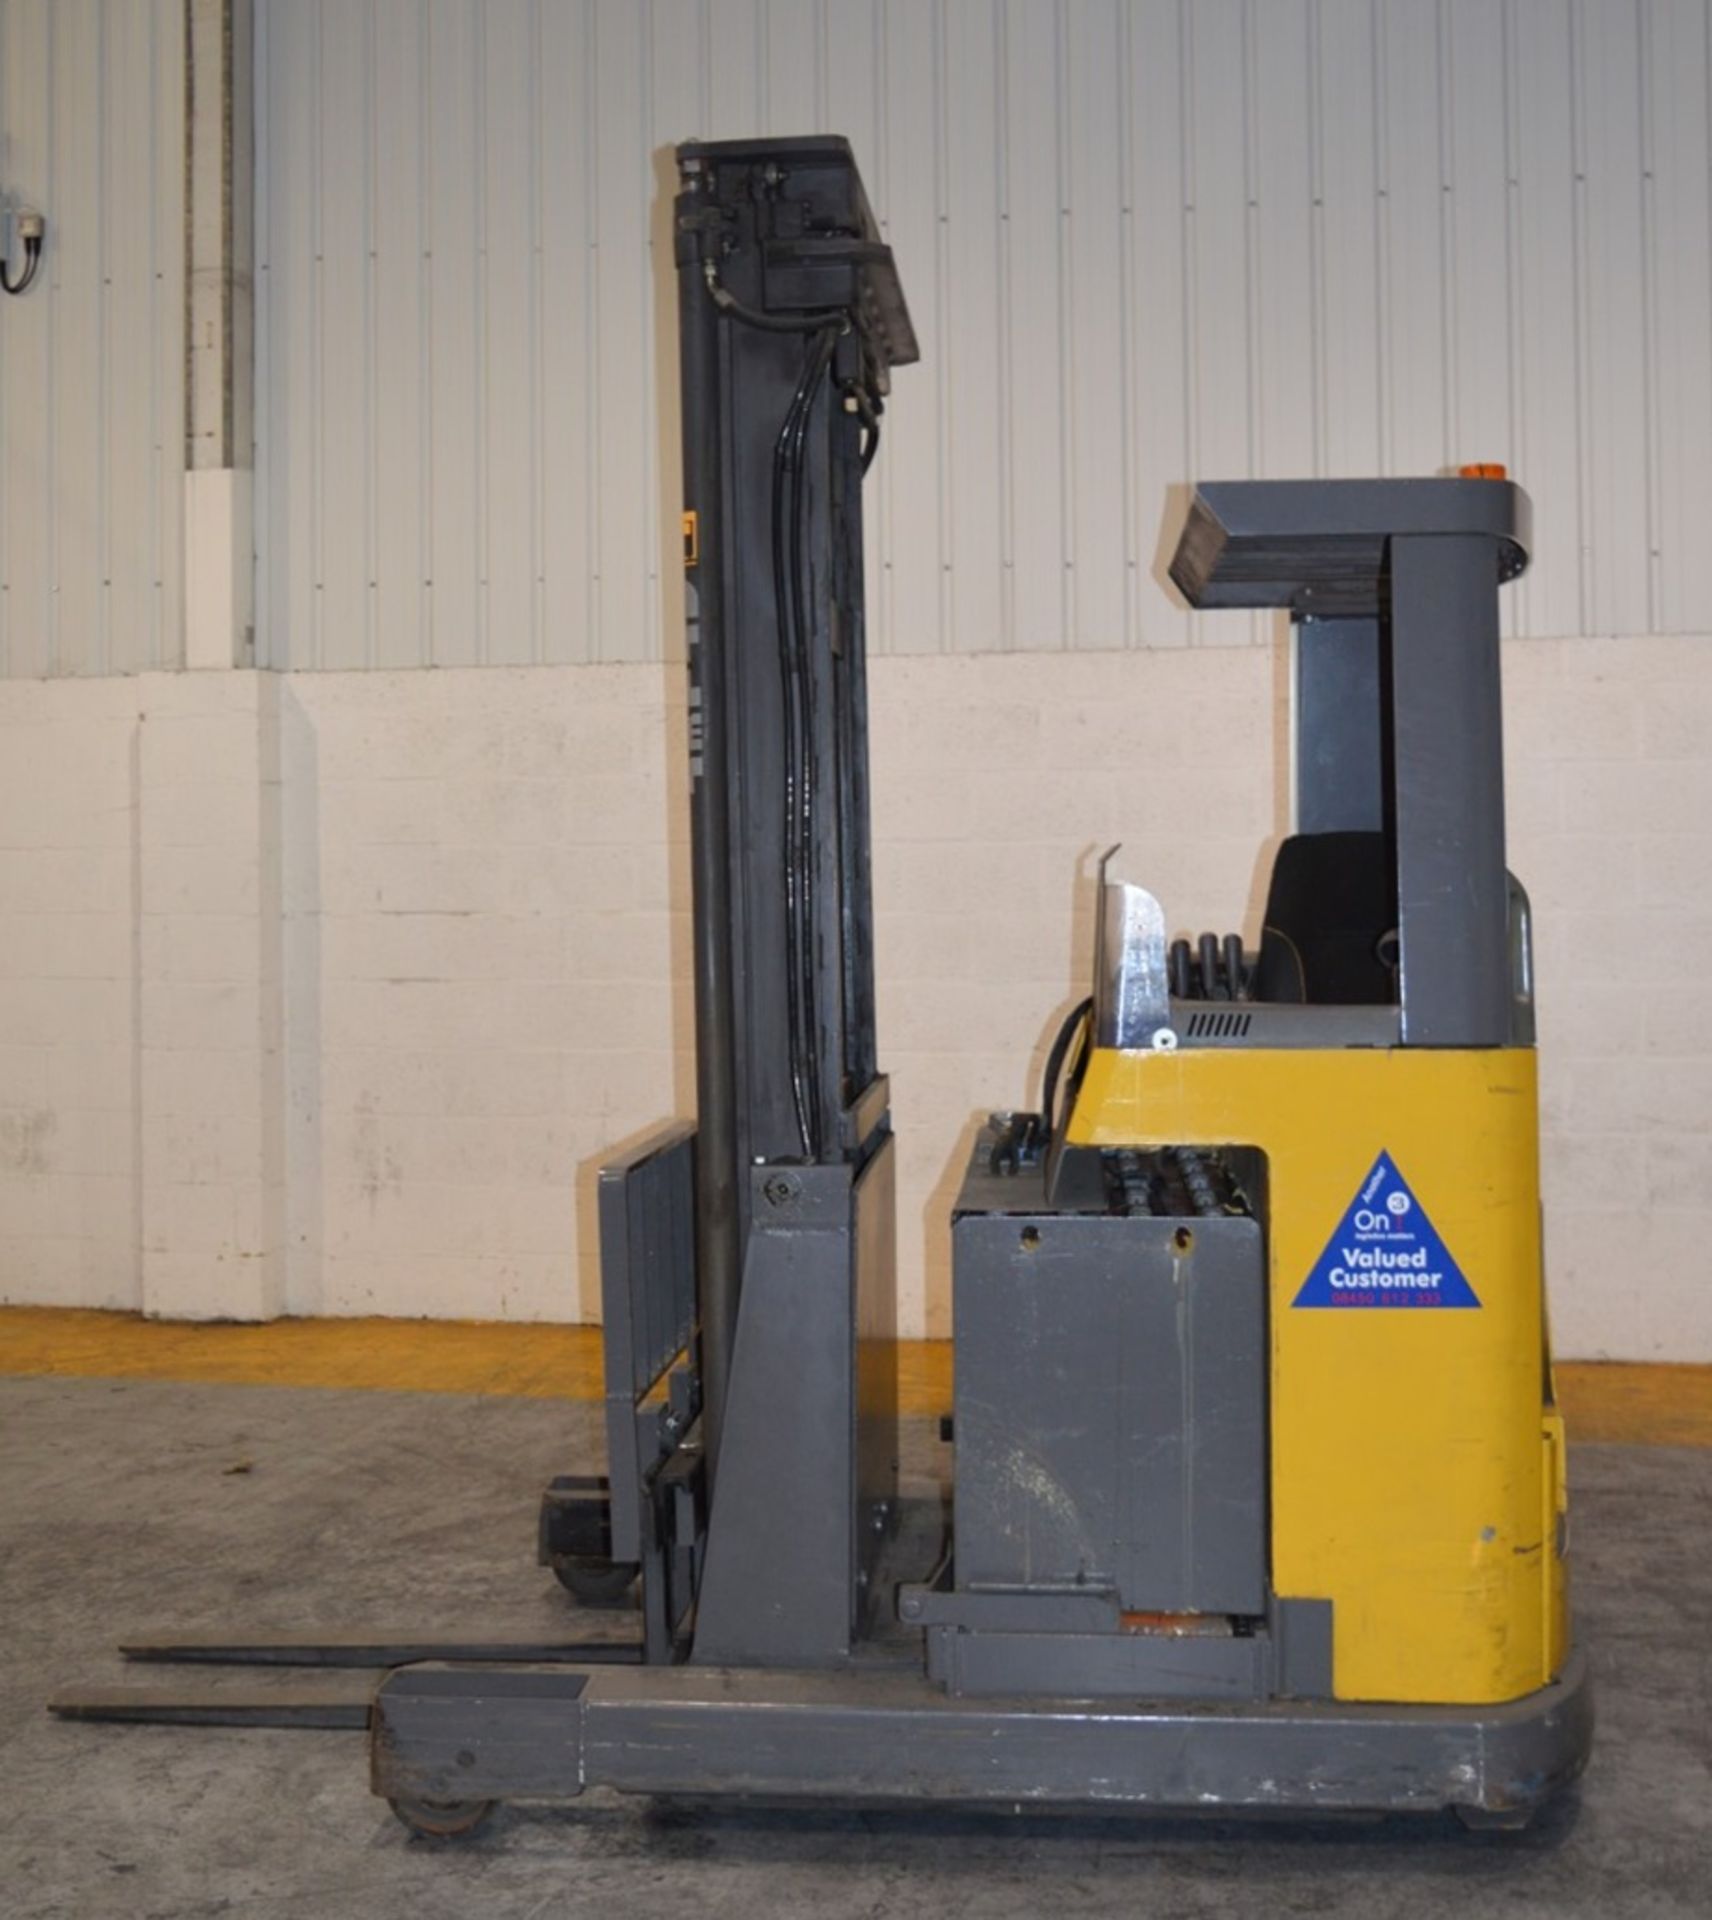 1 x Atlet Electric Forklift Reach Truck - 1997 - Model 200DTFVXM 660 UHS - Includes Operation Code